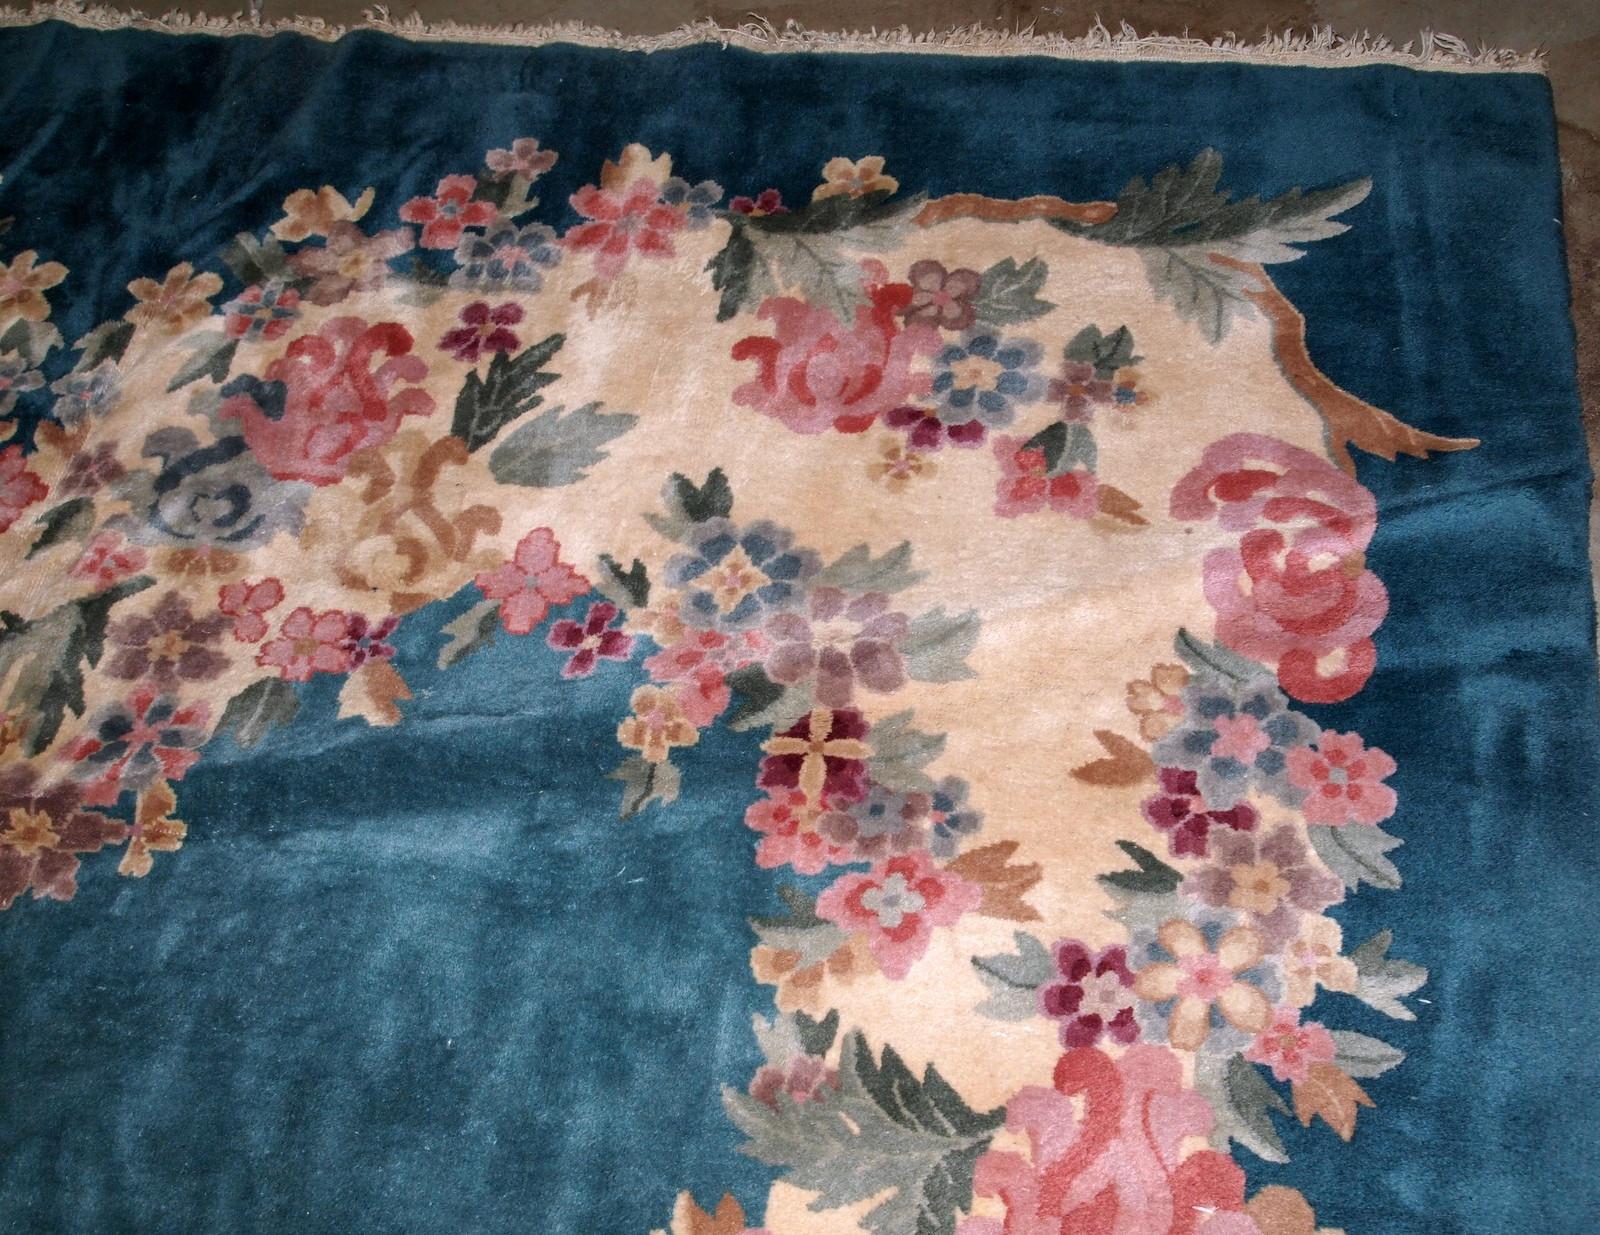 Handmade antique Art Deco Chinese rug in turquoise color. The rug decorated in Art Deco floral design. It is in original good condition.

?-condition: original good,

-circa 1920s,

-size: 8.9' x 11.2' (271cm x 341cm),

-material: